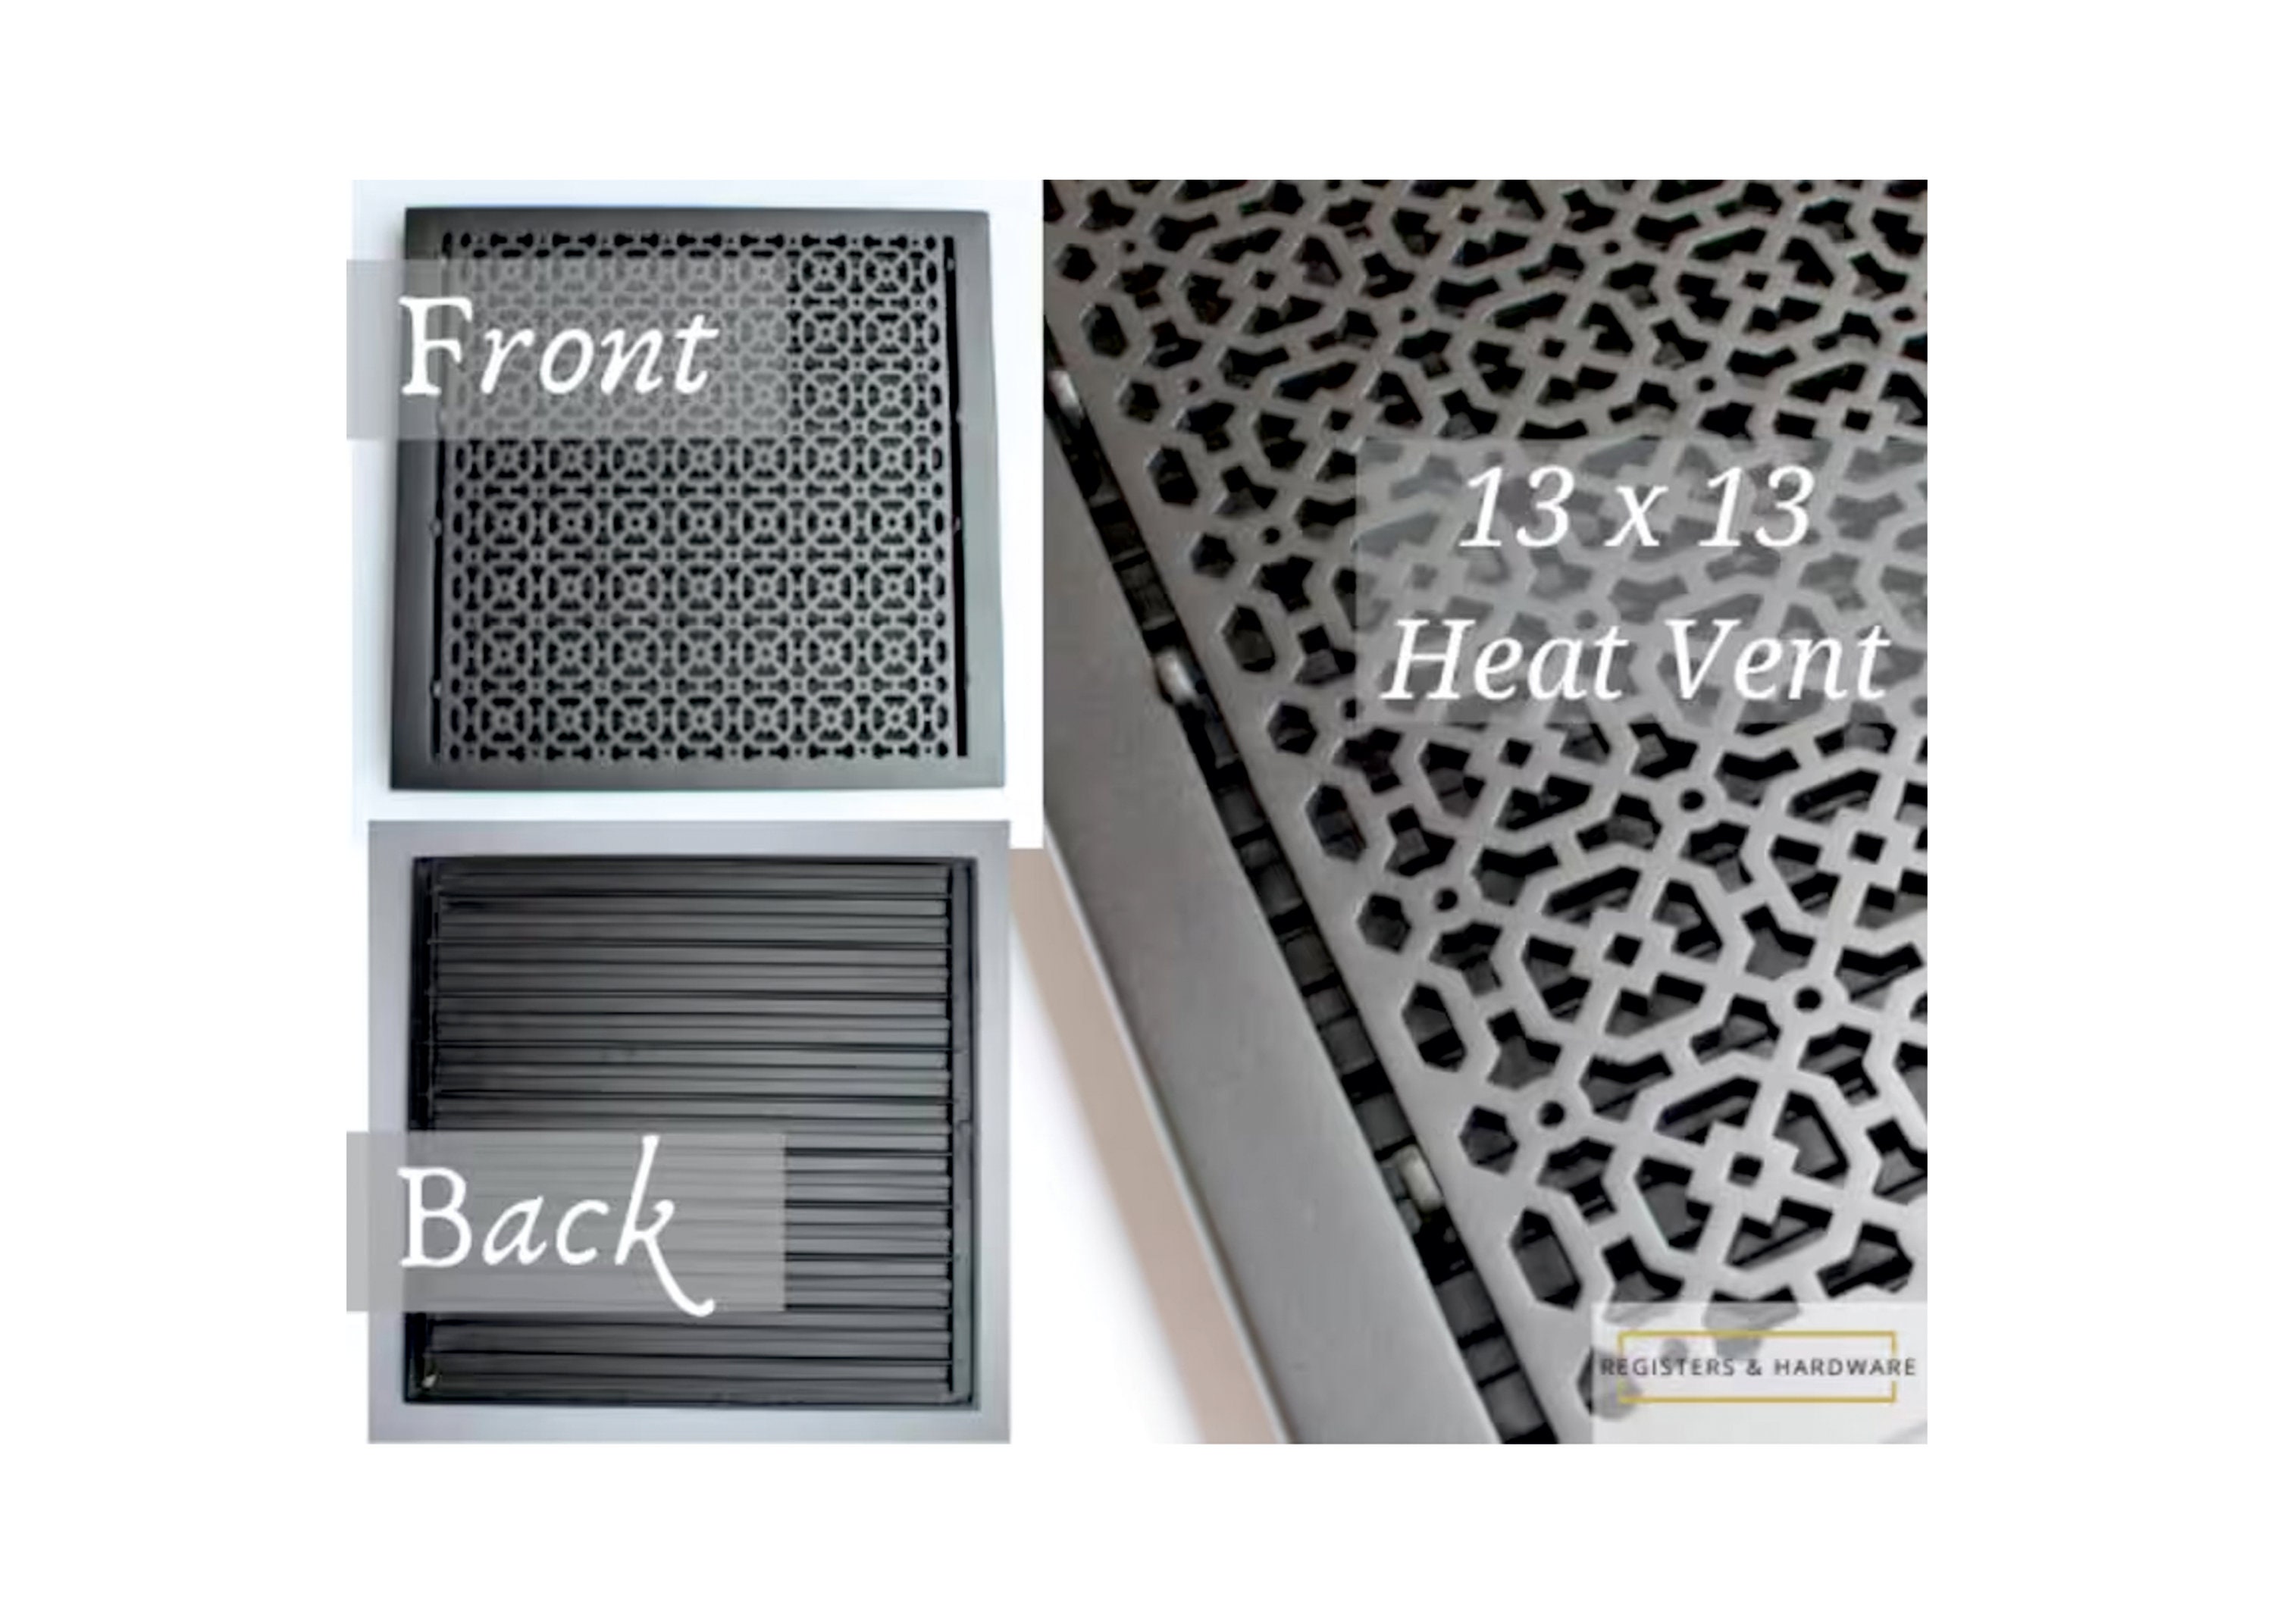 13 x 13 Insulated Magnetic Cover for Aluminum Registers & Vents